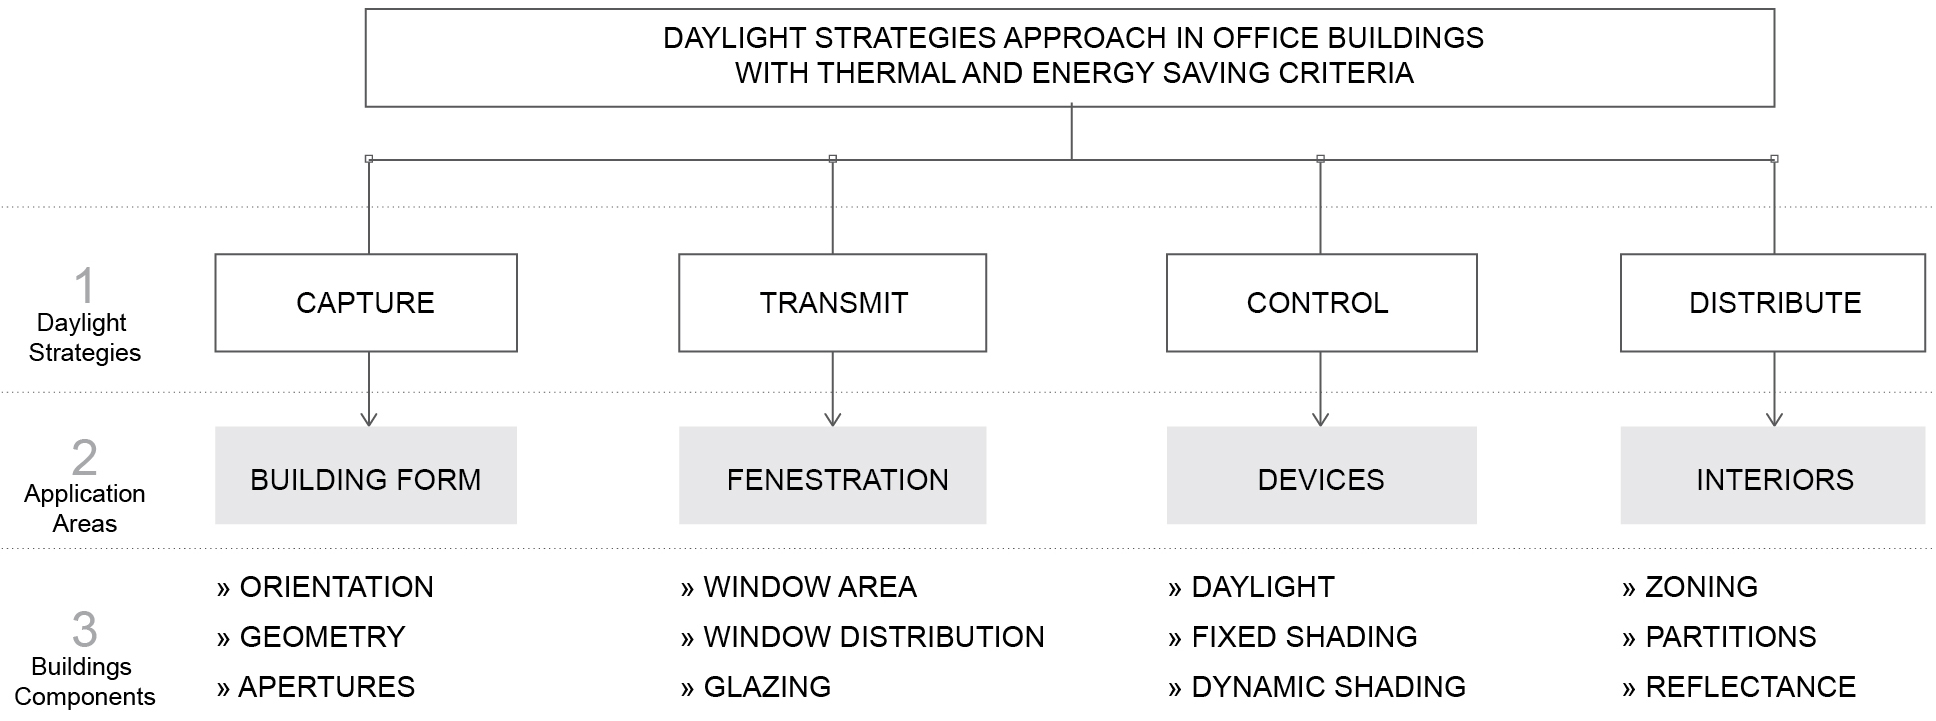 Daylight strategies approach in the office building.